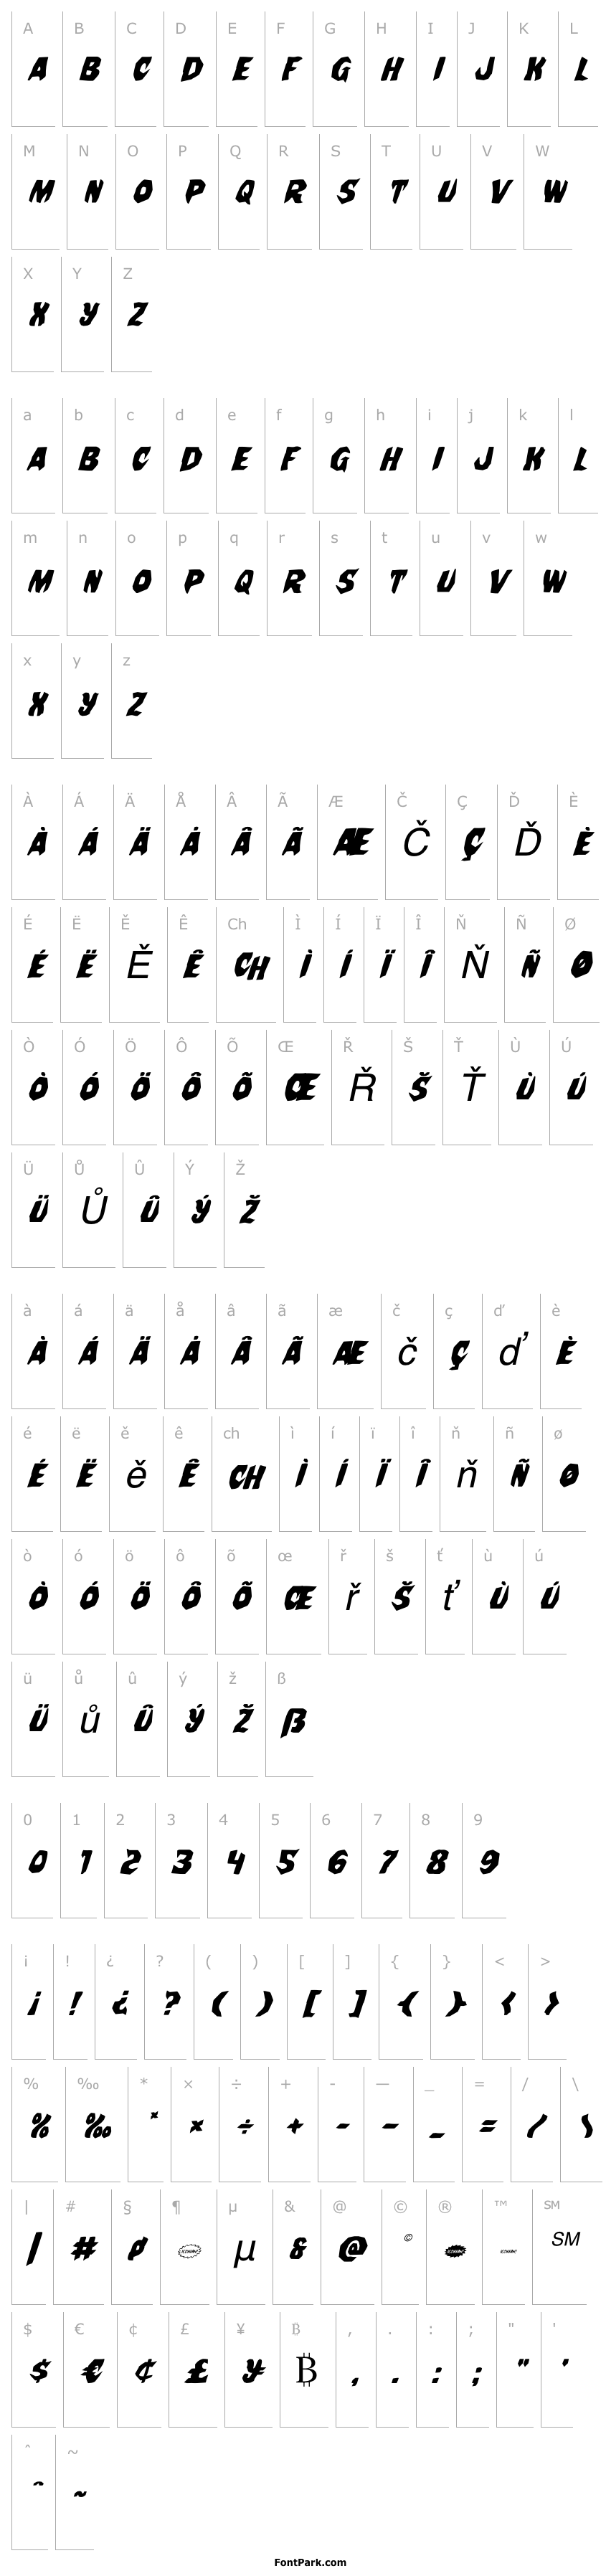 Overview Nightchilde Staggered Italic